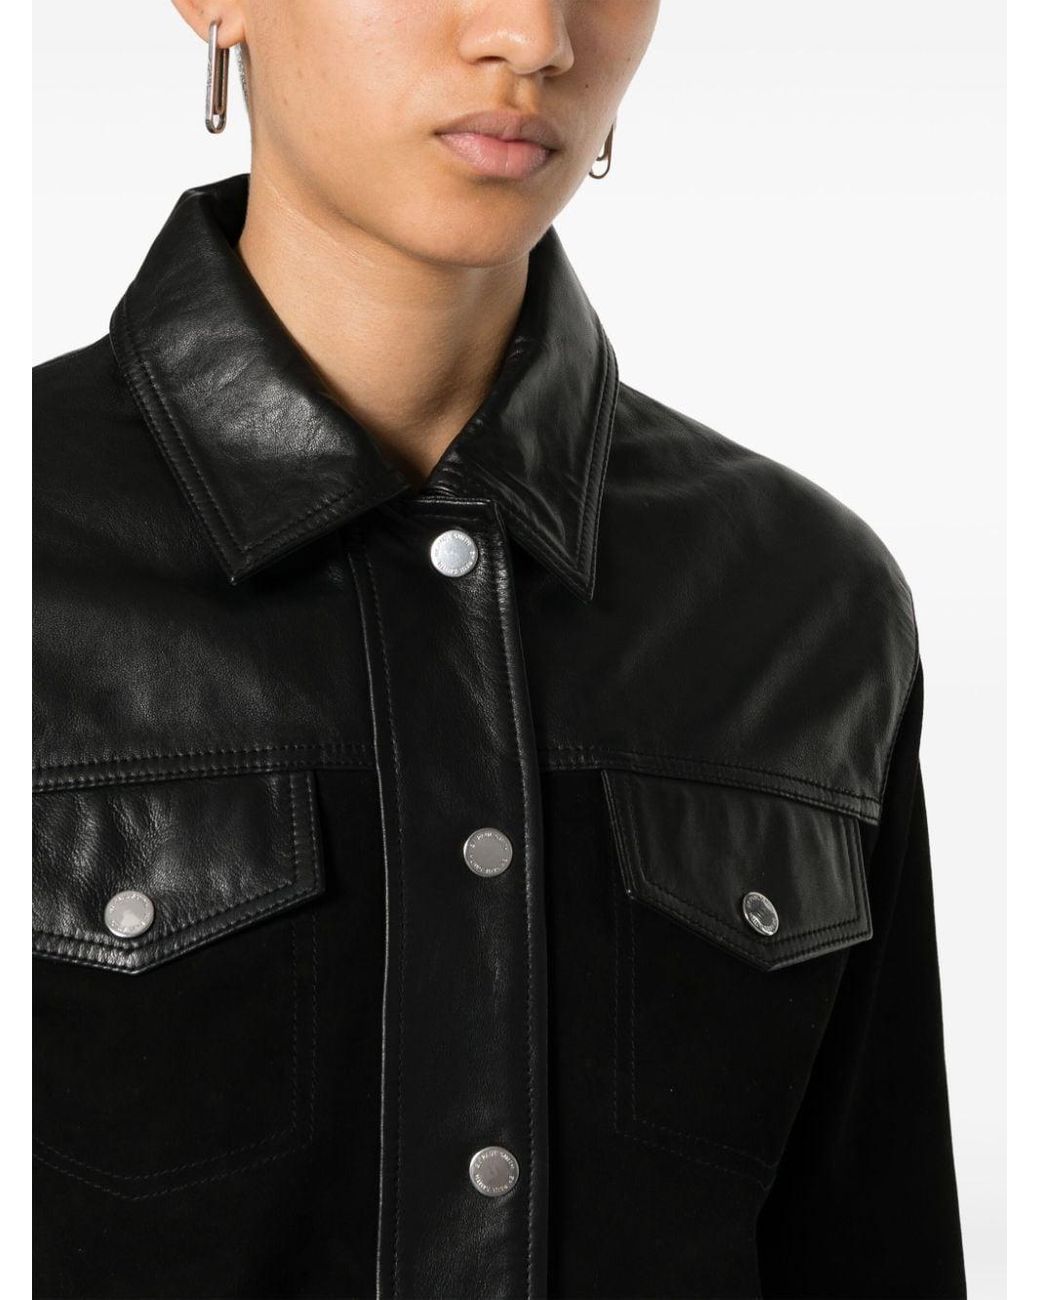 BOSS - Cropped button-up leather jacket bonded with denim